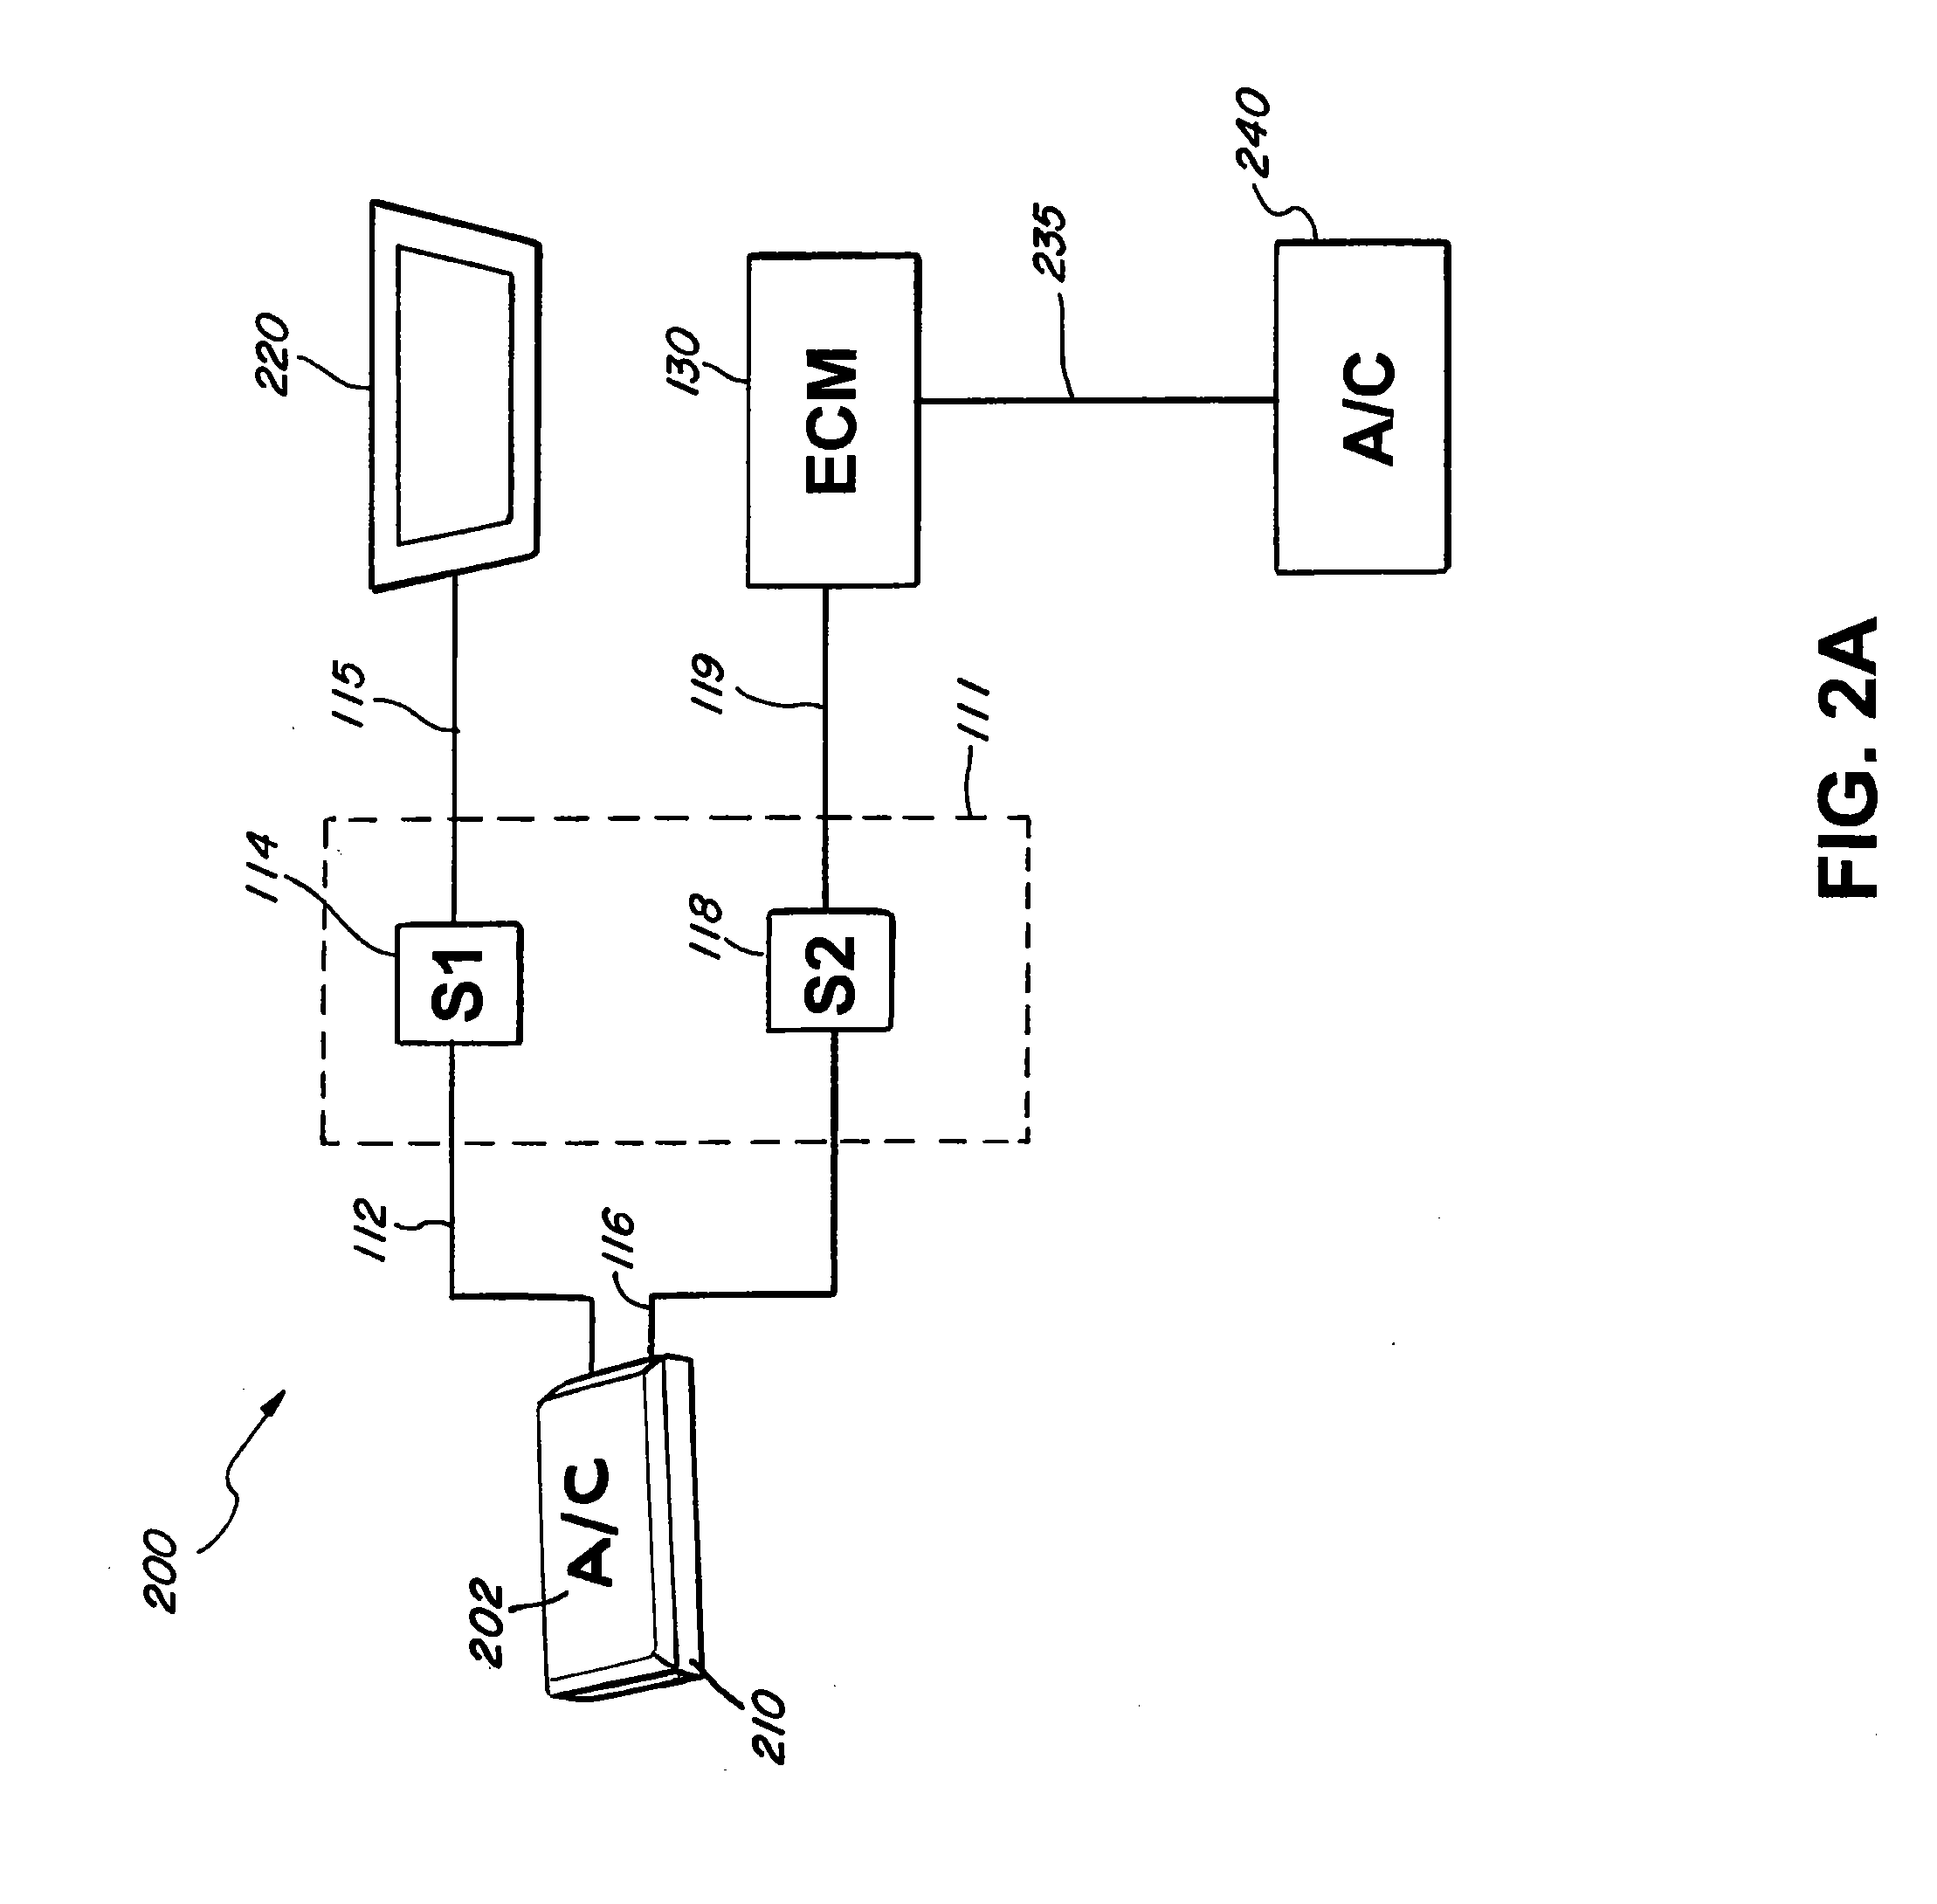 Electronic control module interface system for a motor vehicle